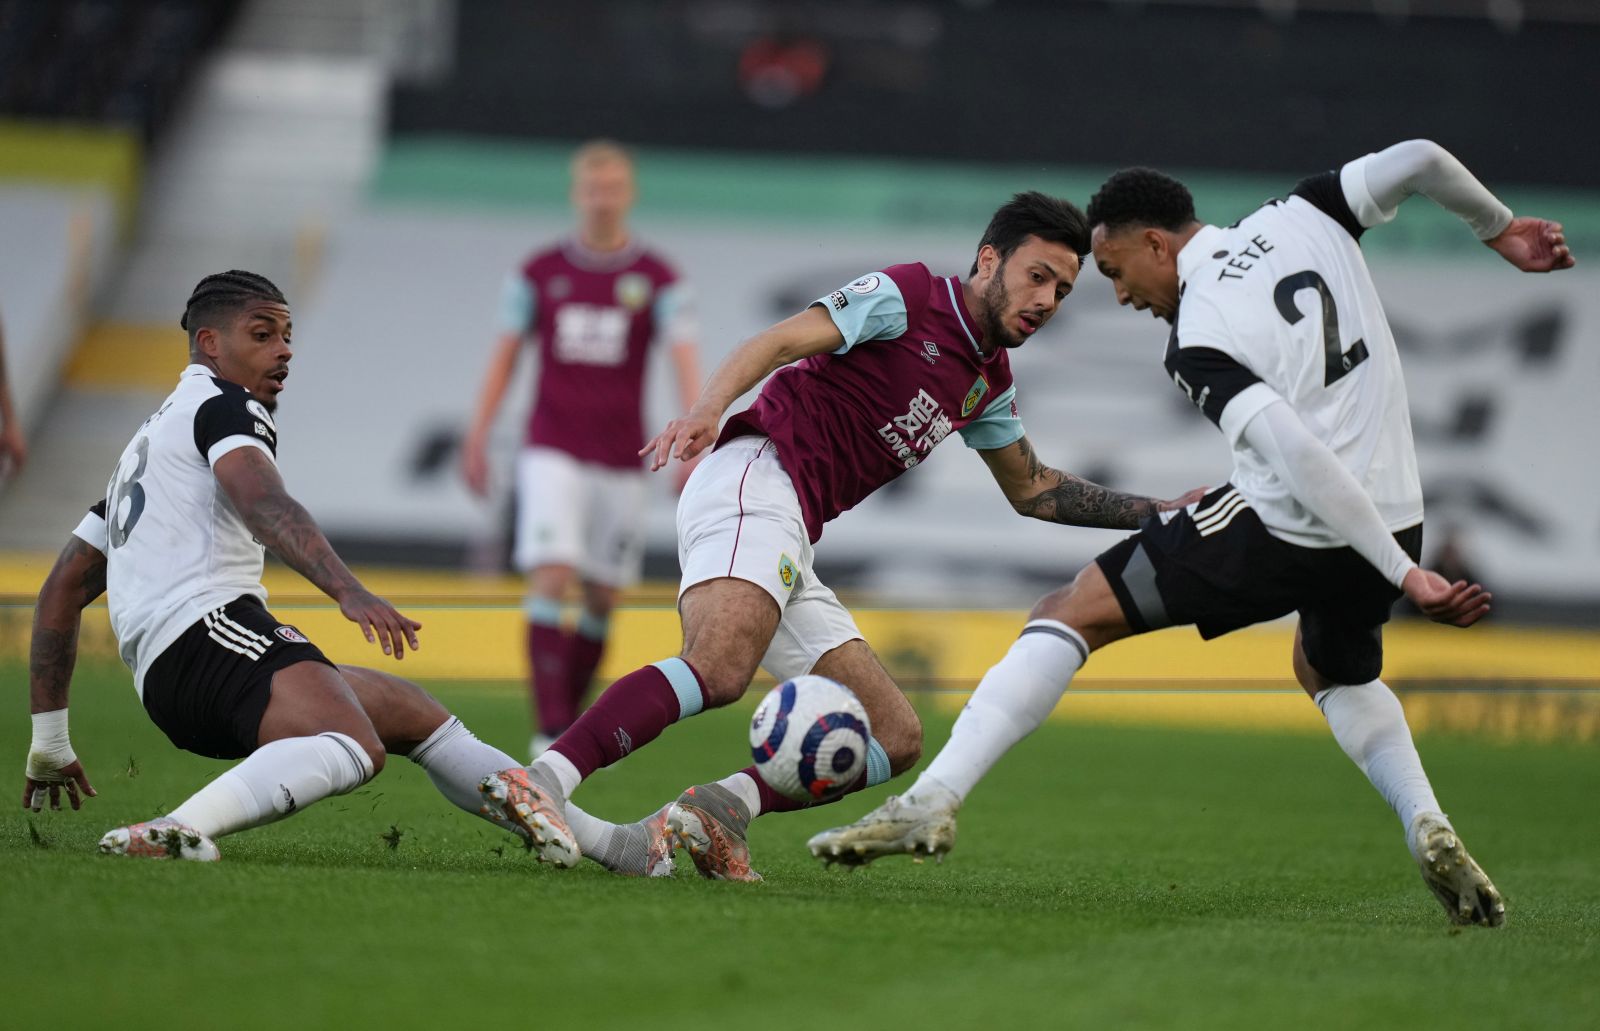 epa09189994 Kenny Tete (R) and Mario Lemina (L) of Fulham in action against Dwight McNeil (C) of Burnley during the English Premier League soccer match between Fulham FC and Burnley FC in London, Britain, 10 May 2021.  EPA/Clive Rose / POOL EDITORIAL USE ONLY. No use with unauthorized audio, video, data, fixture lists, club/league logos or 'live' services. Online in-match use limited to 120 images, no video emulation. No use in betting, games or single club/league/player publications.